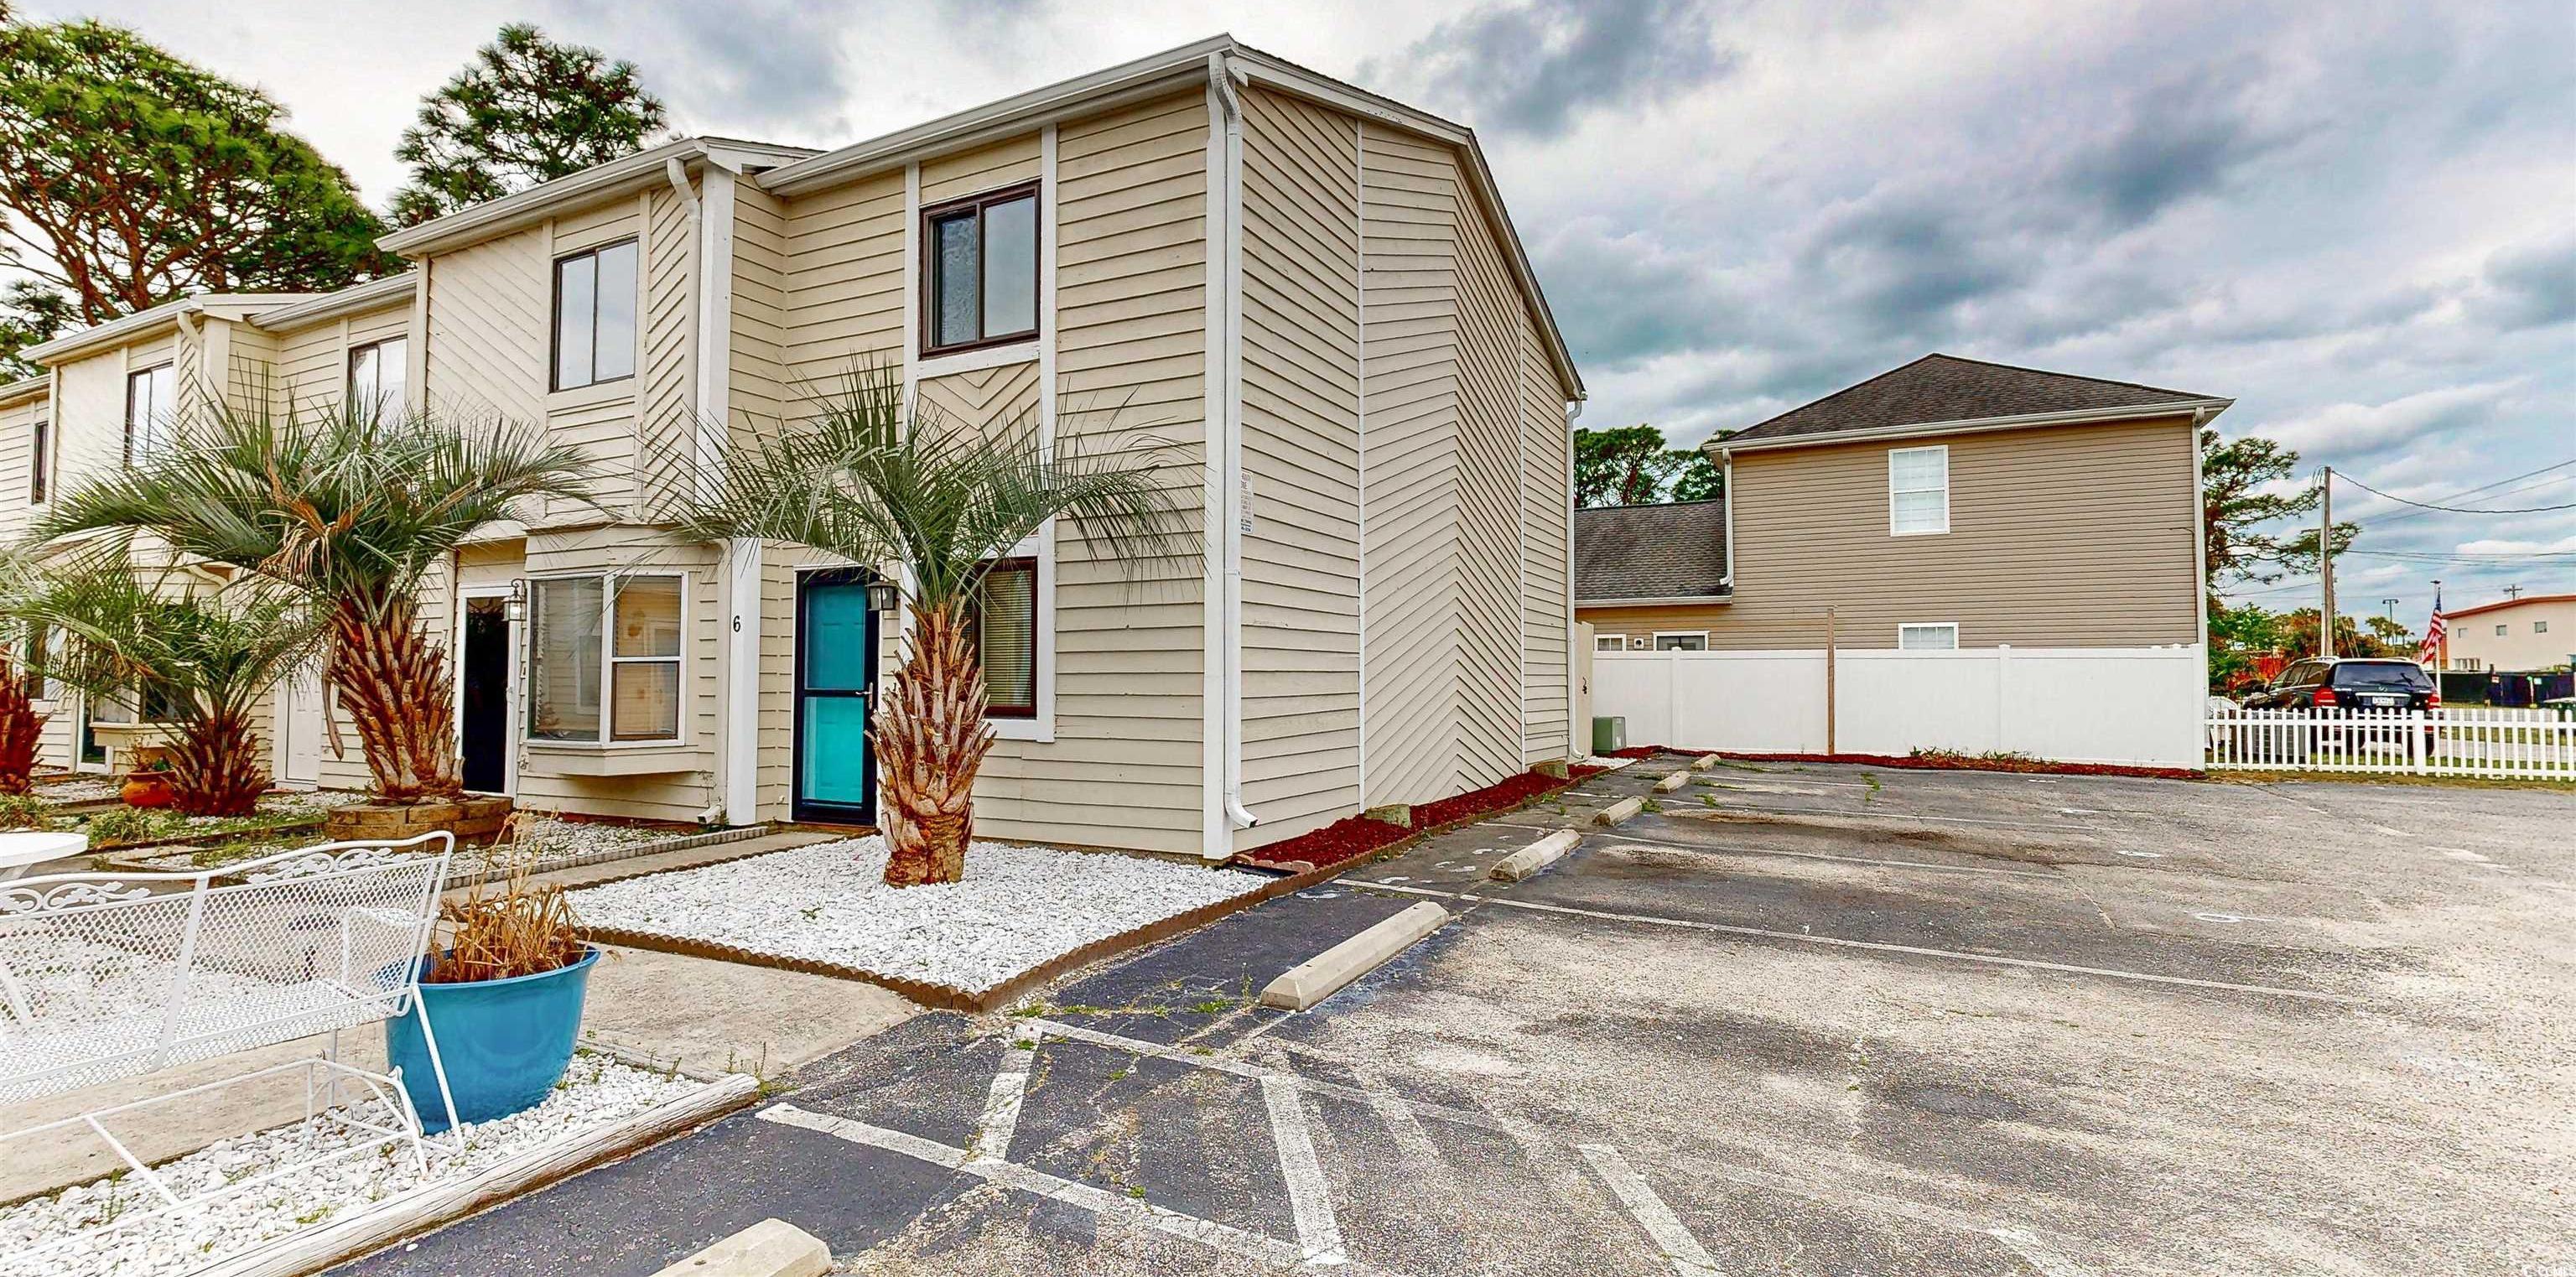 Photo one of 1609 Madison Dr. # 6 North Myrtle Beach SC 29582 | MLS 2408943